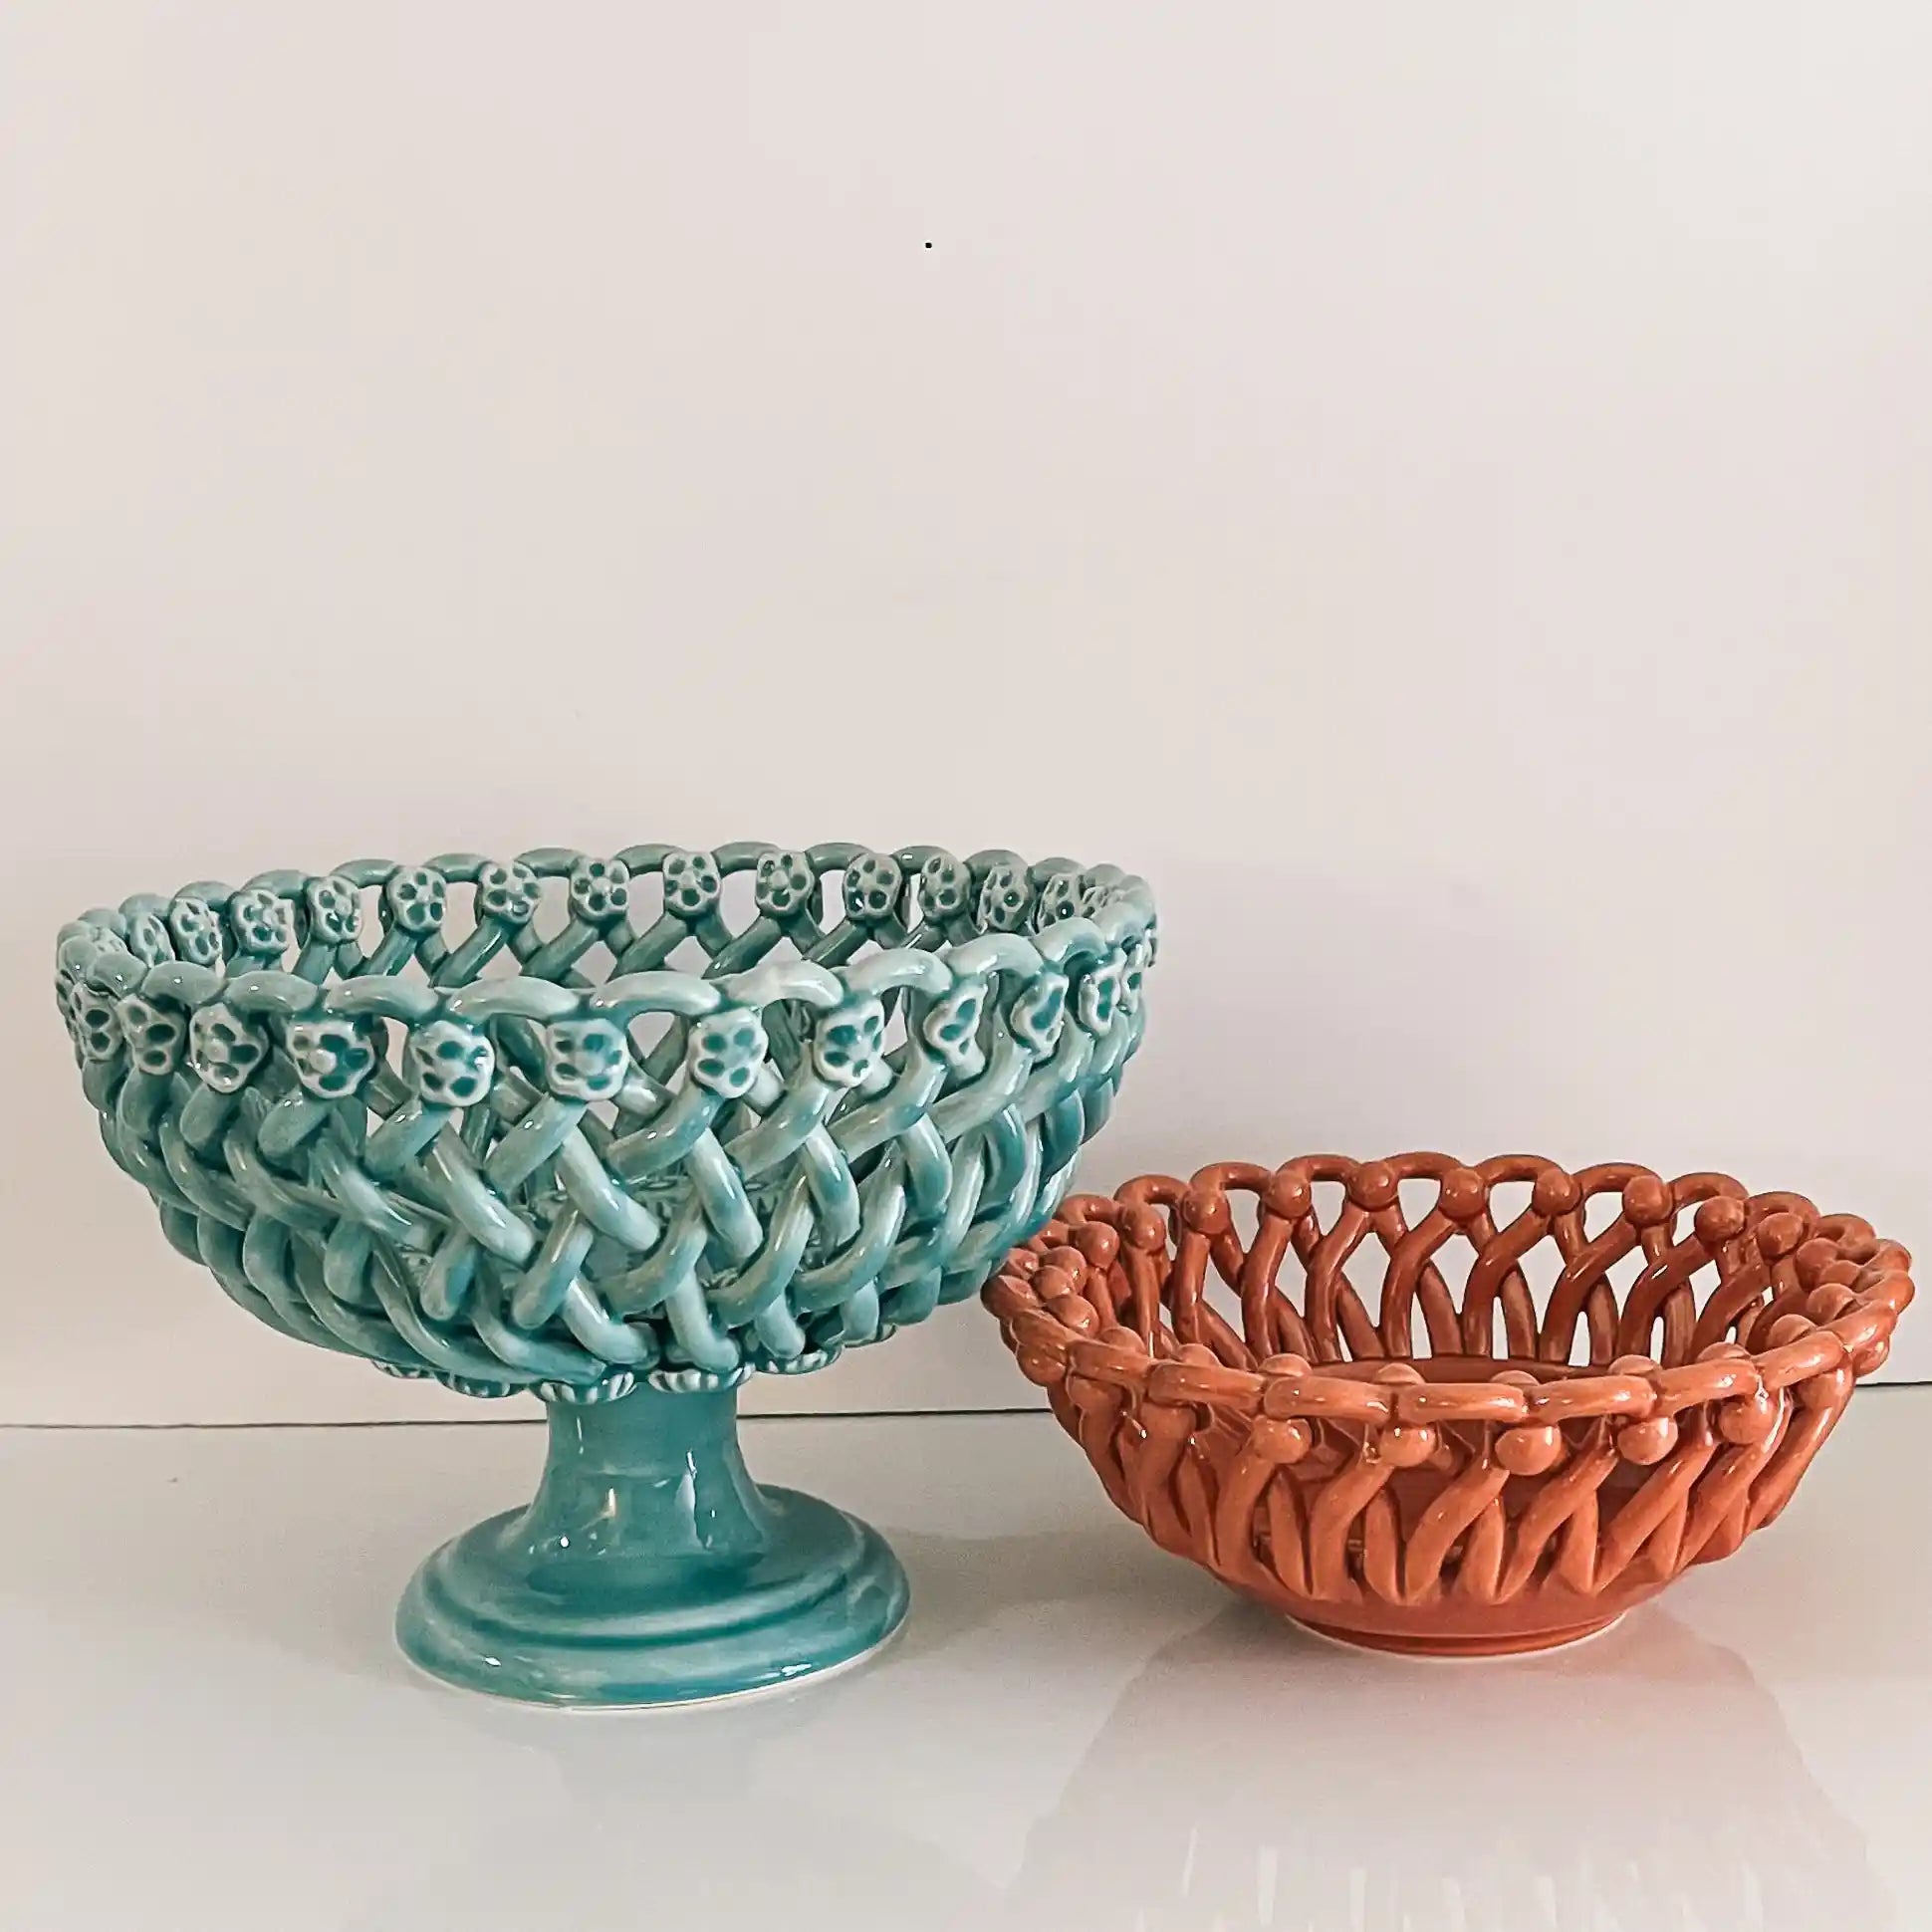 Iconic woven basket with foot